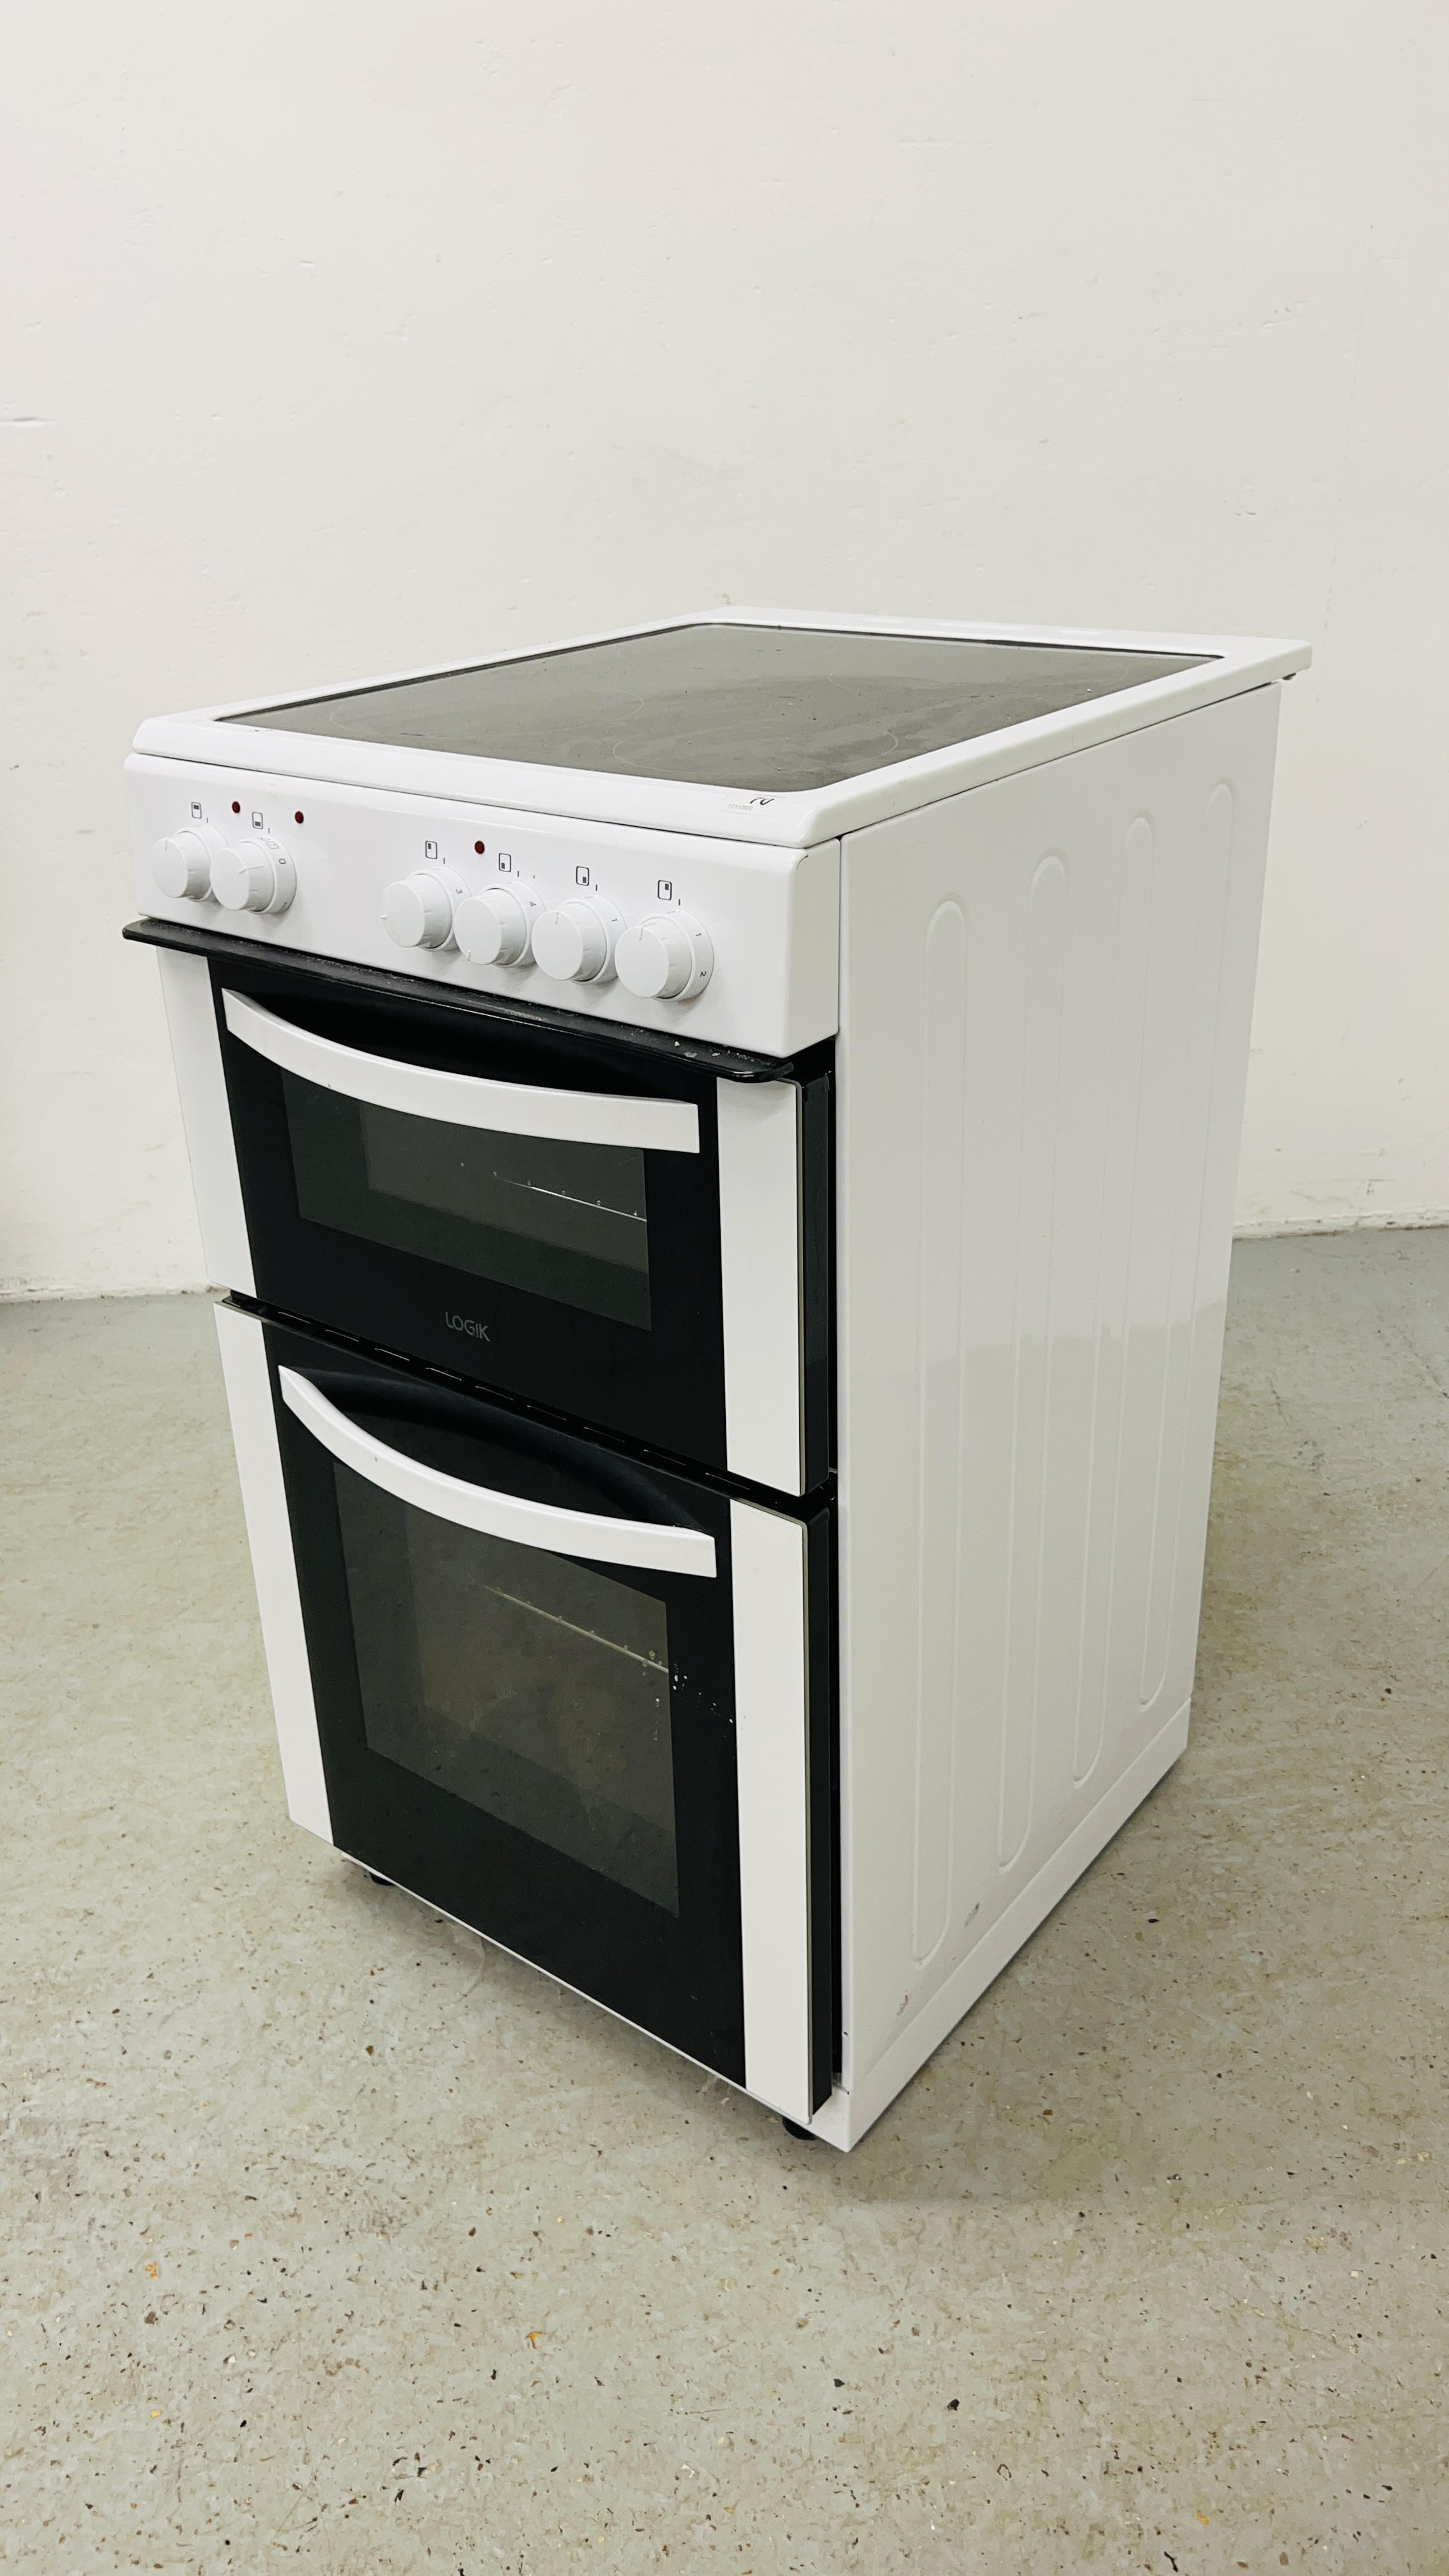 LOGIK ELECTRIC OVEN - SOLD AS SEEN. - Image 2 of 10